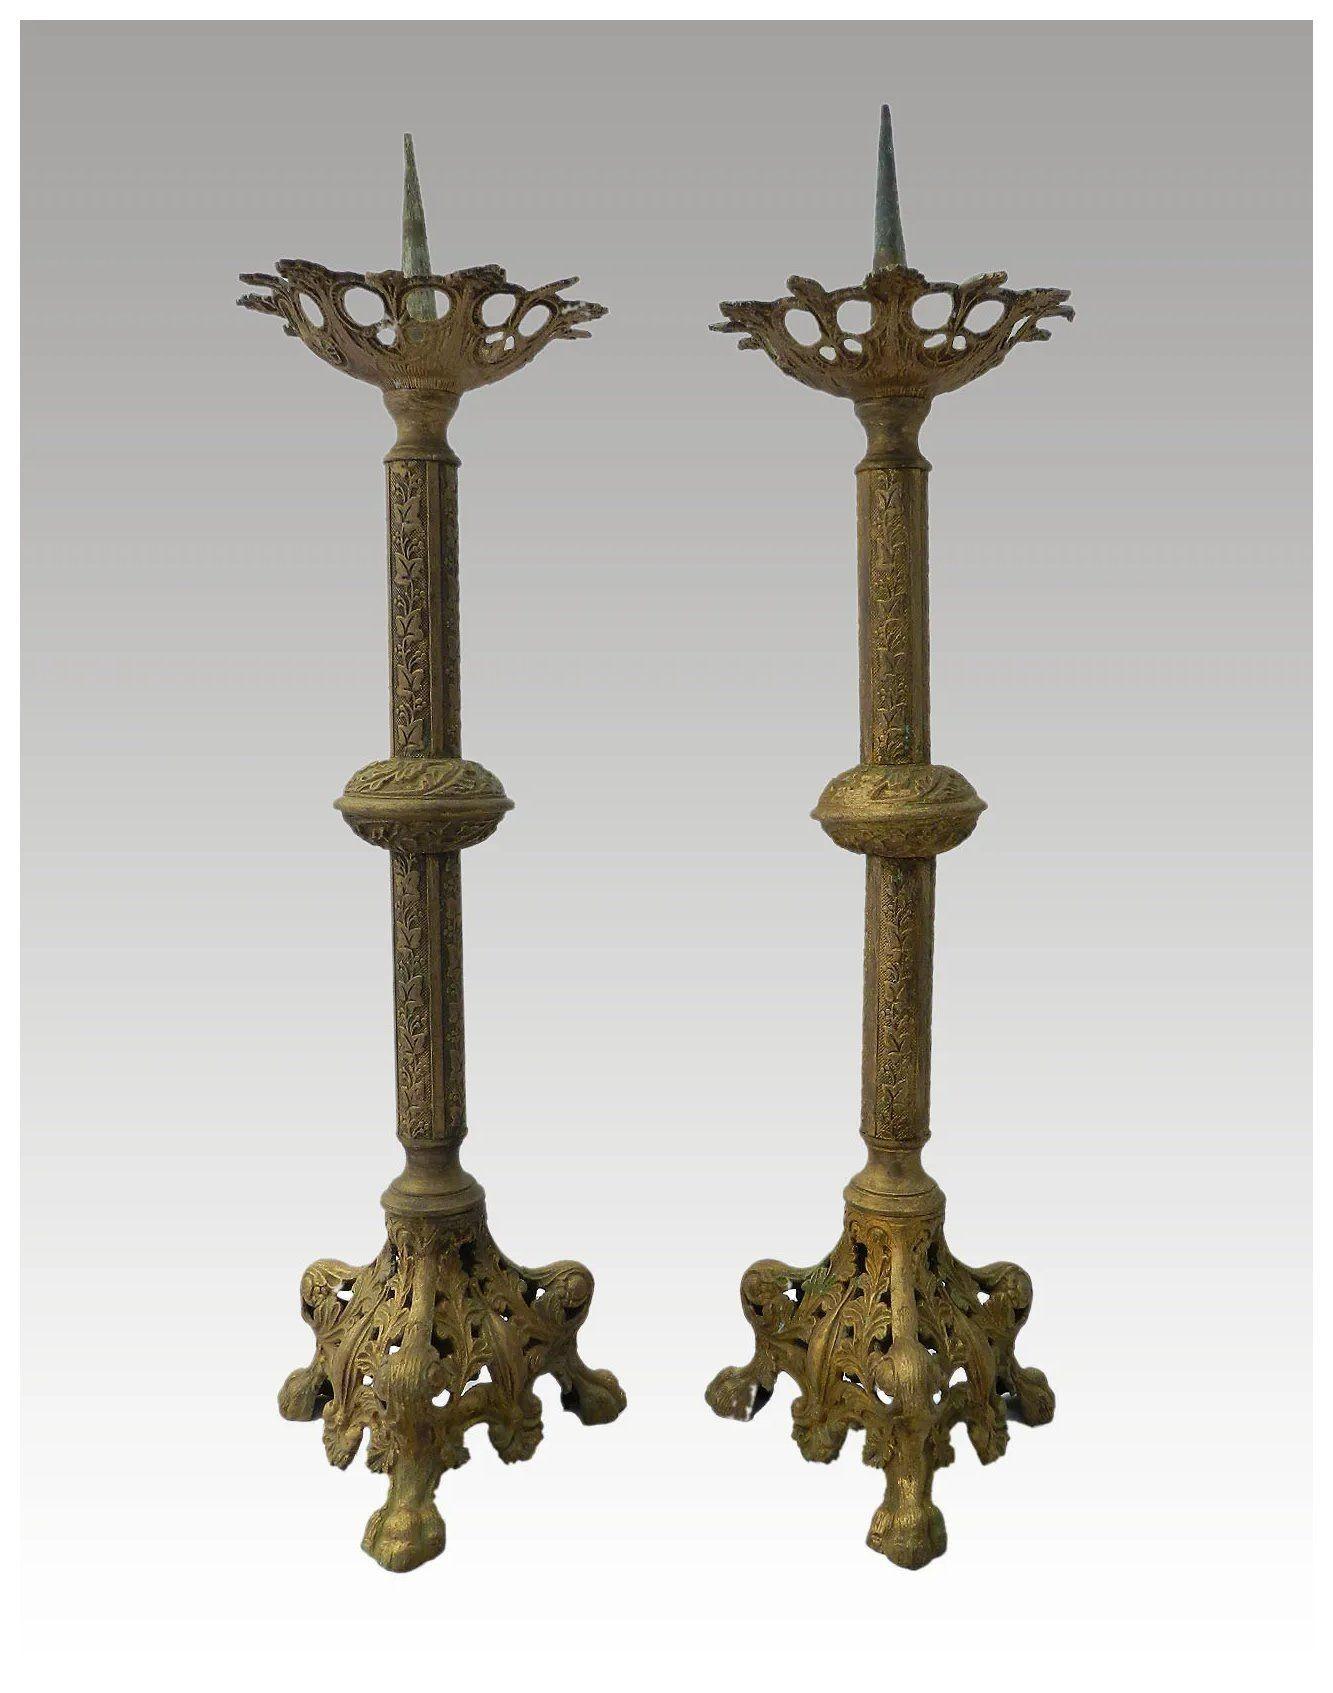 Pair of French Pricket Sticks 19th Century
we also have another pair of these that match listed separately
Altar Sticks
Gilded Metal
From a French Chateau Chapel
Good antique used condition with usual signs of age and use with verdigris in places
We